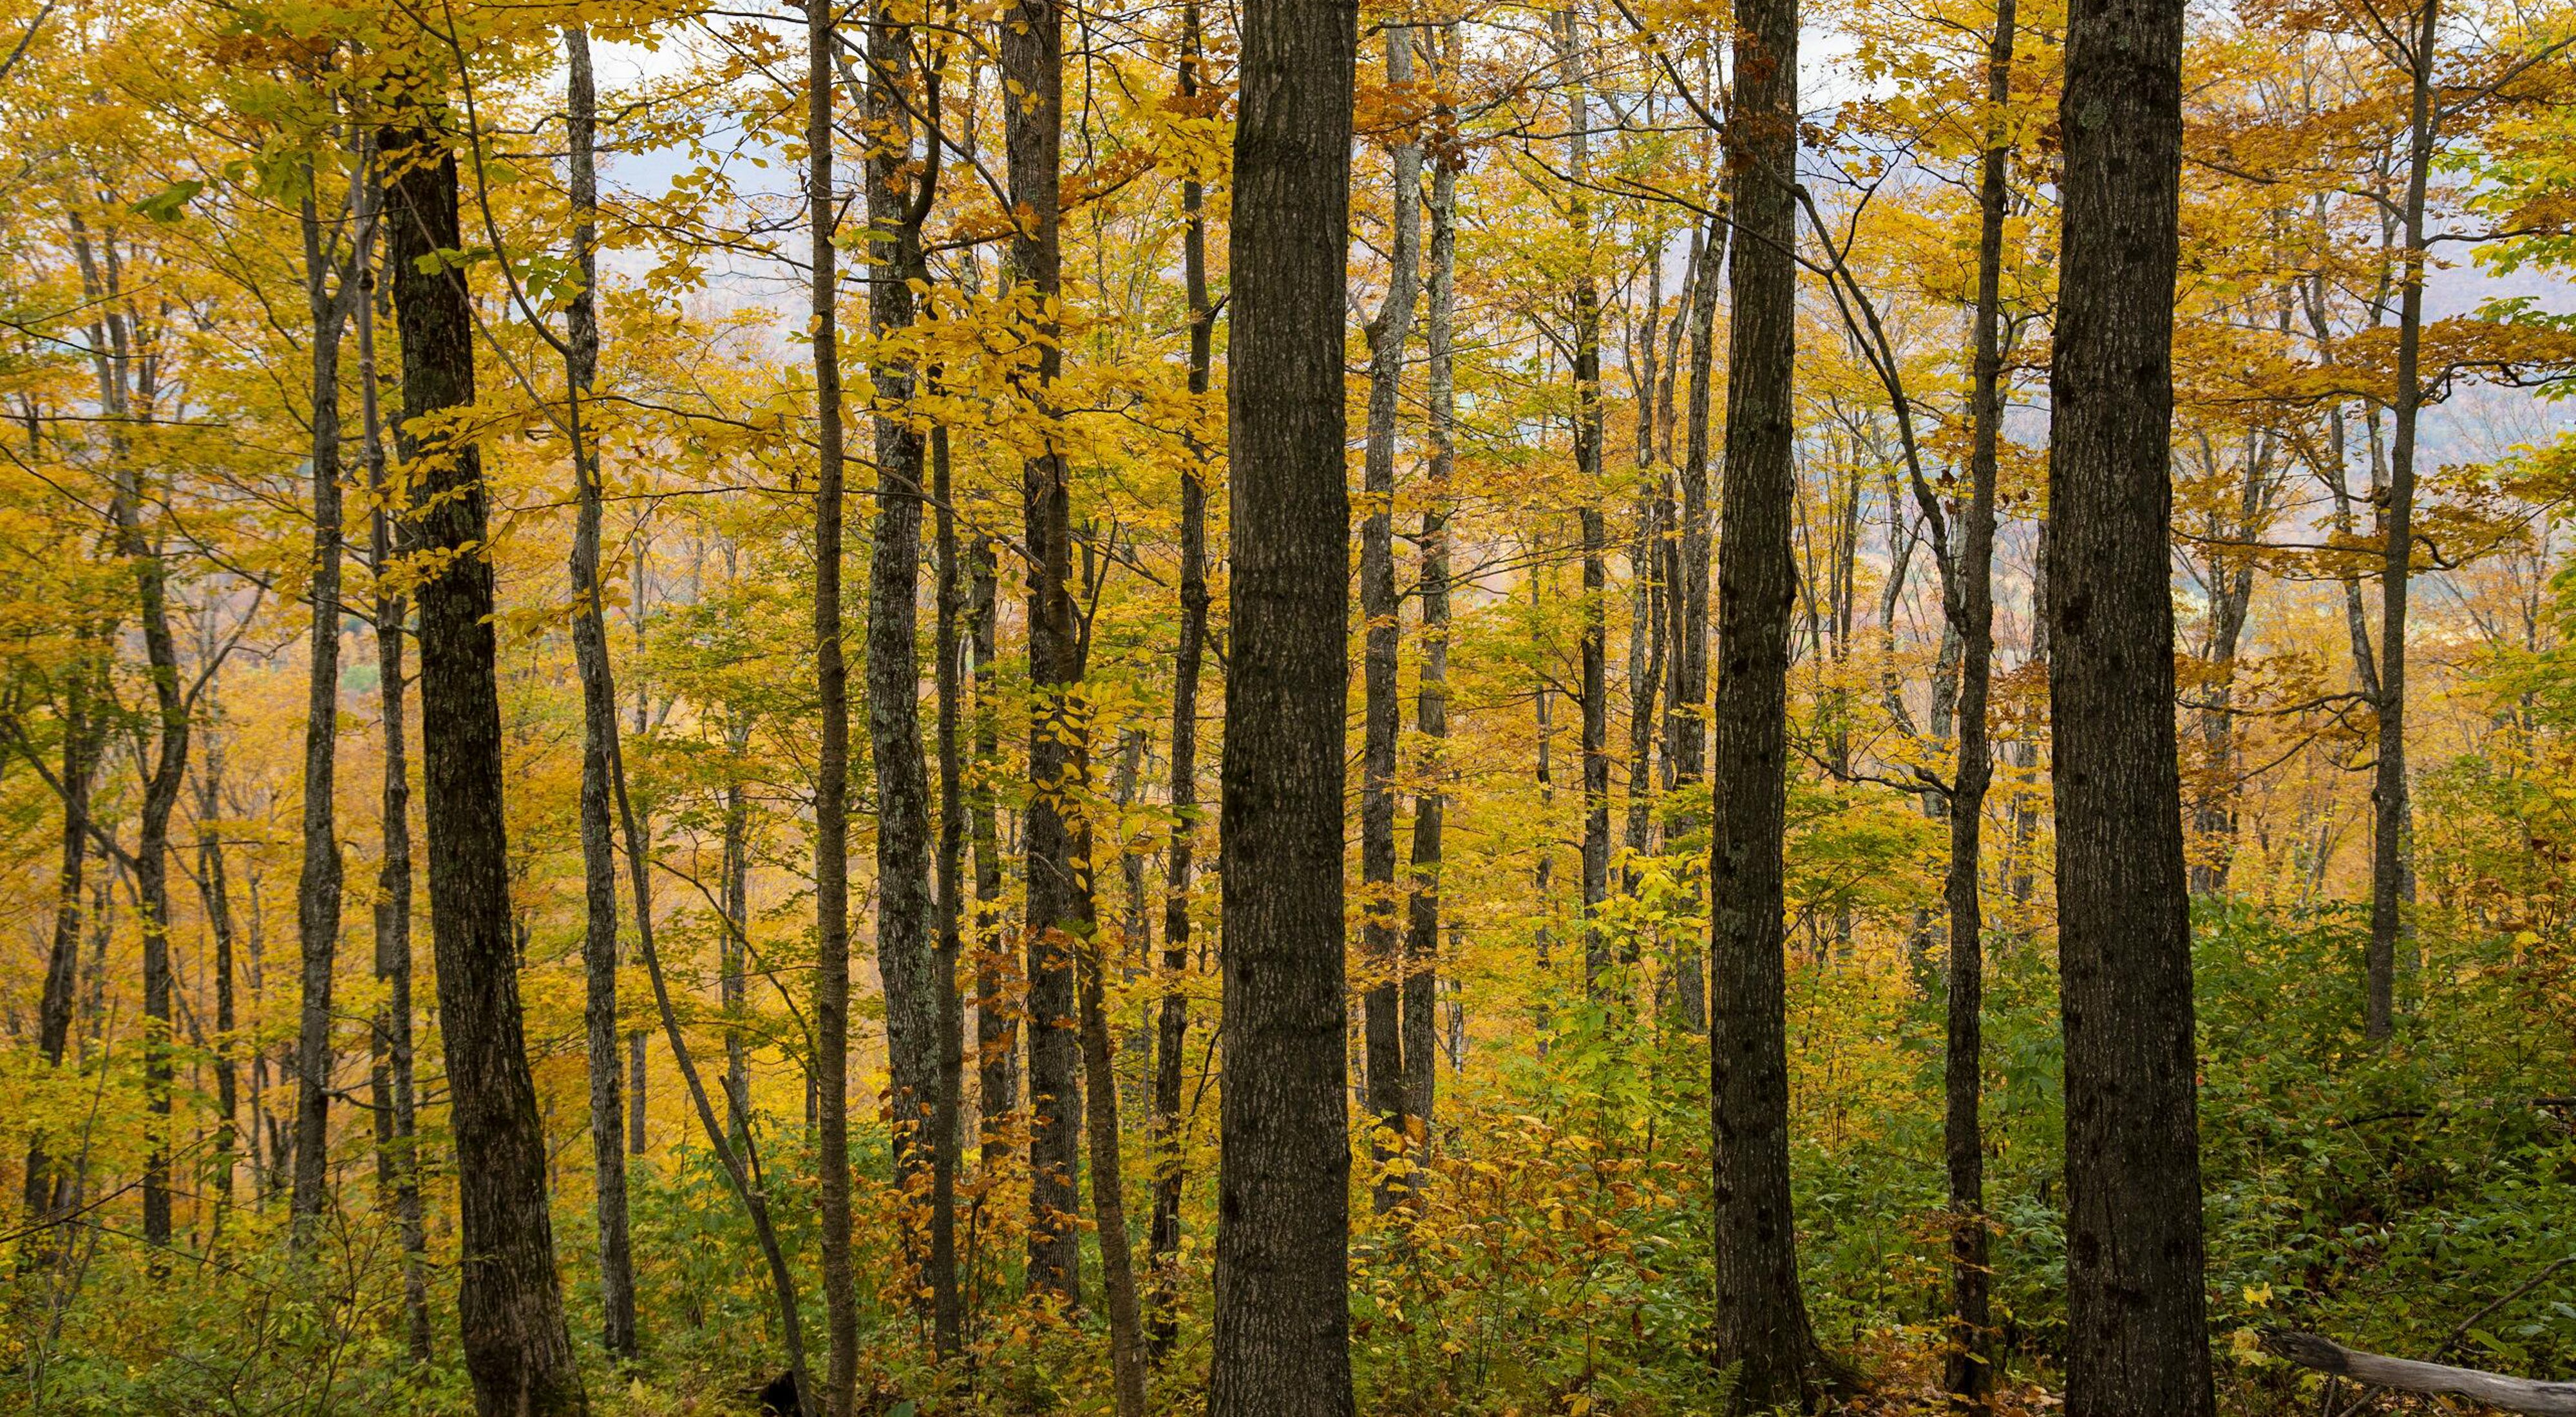 A forest view of trees changing to gold in the fall